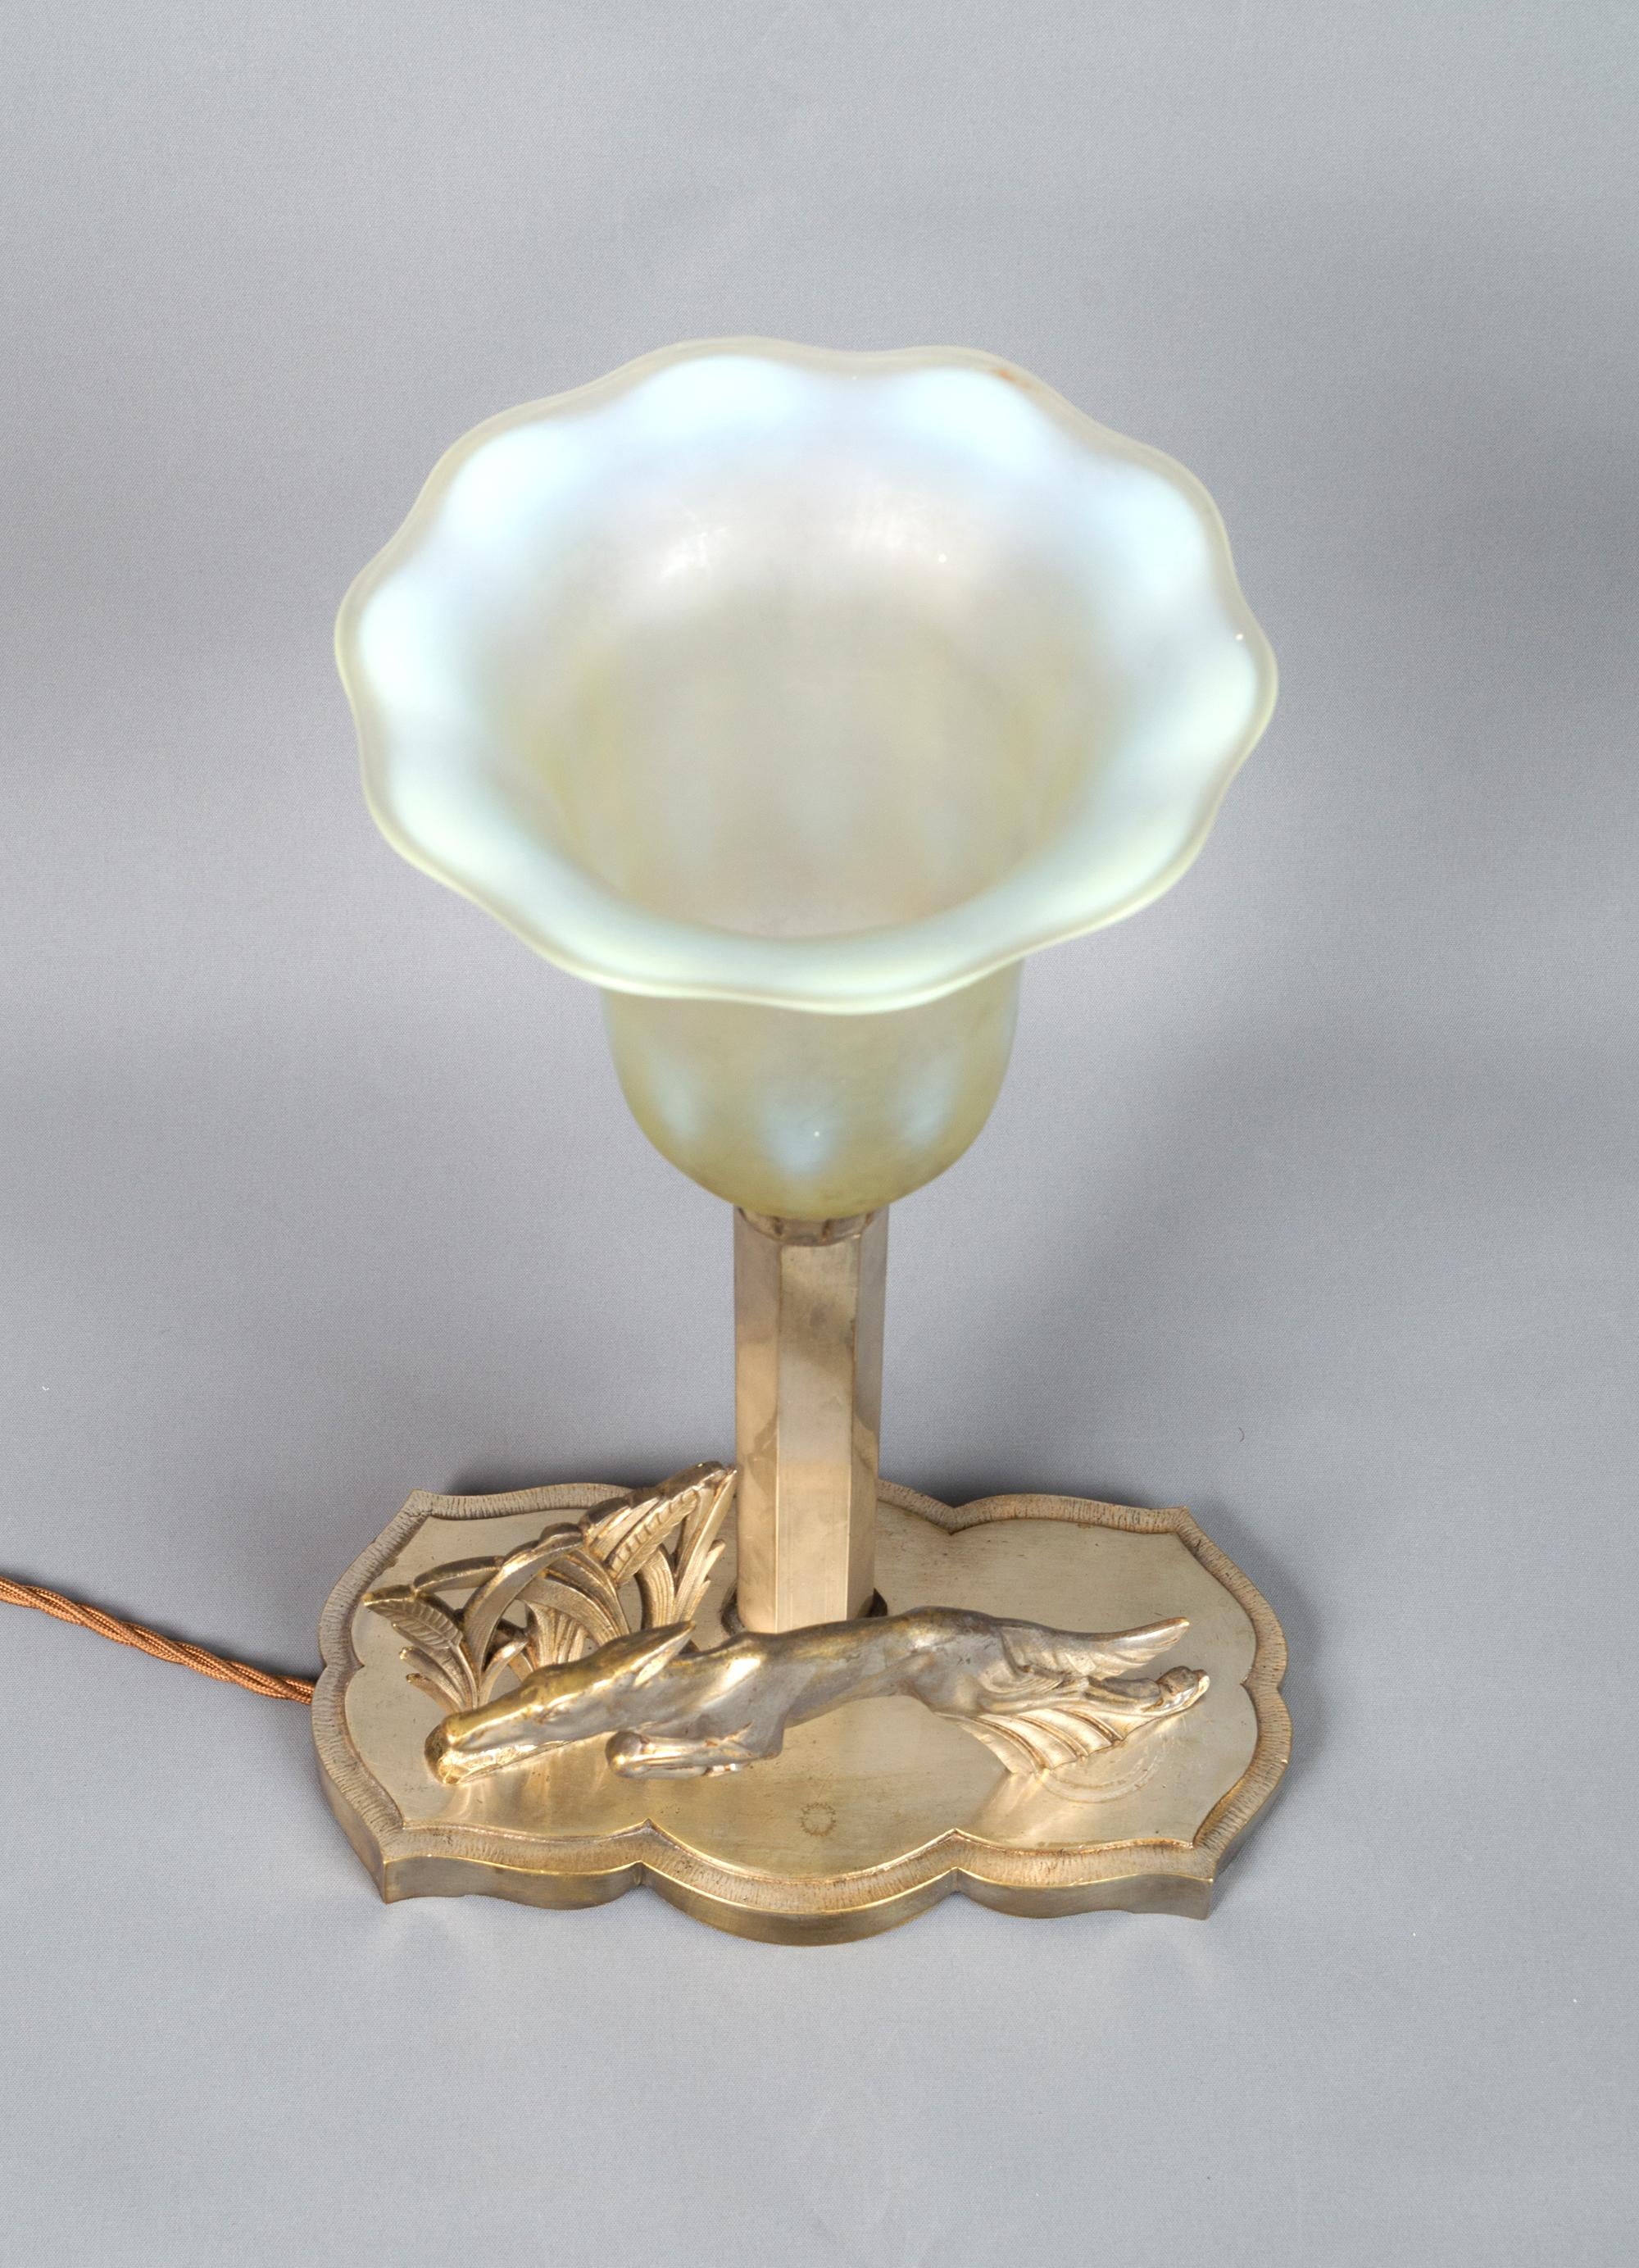 French Art Deco Chrome and Glass 'Leaping Hound' Table Lamp Desk Lamp C.1930 For Sale 2